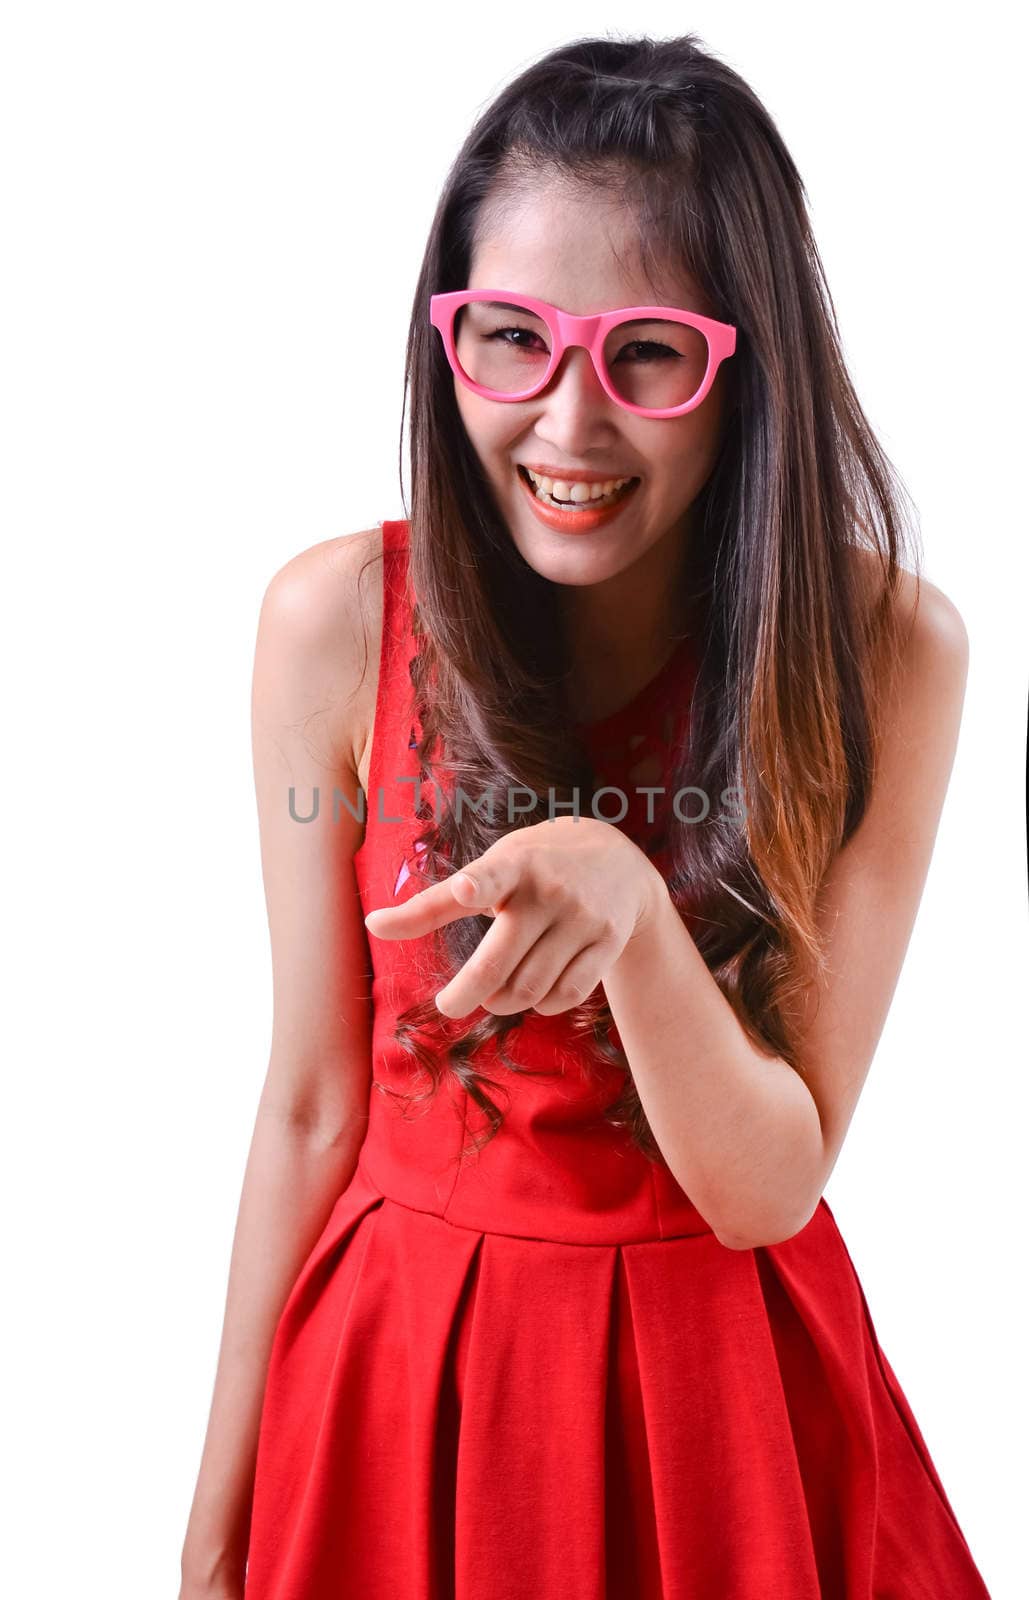 Portrait of a happy woman on a white background